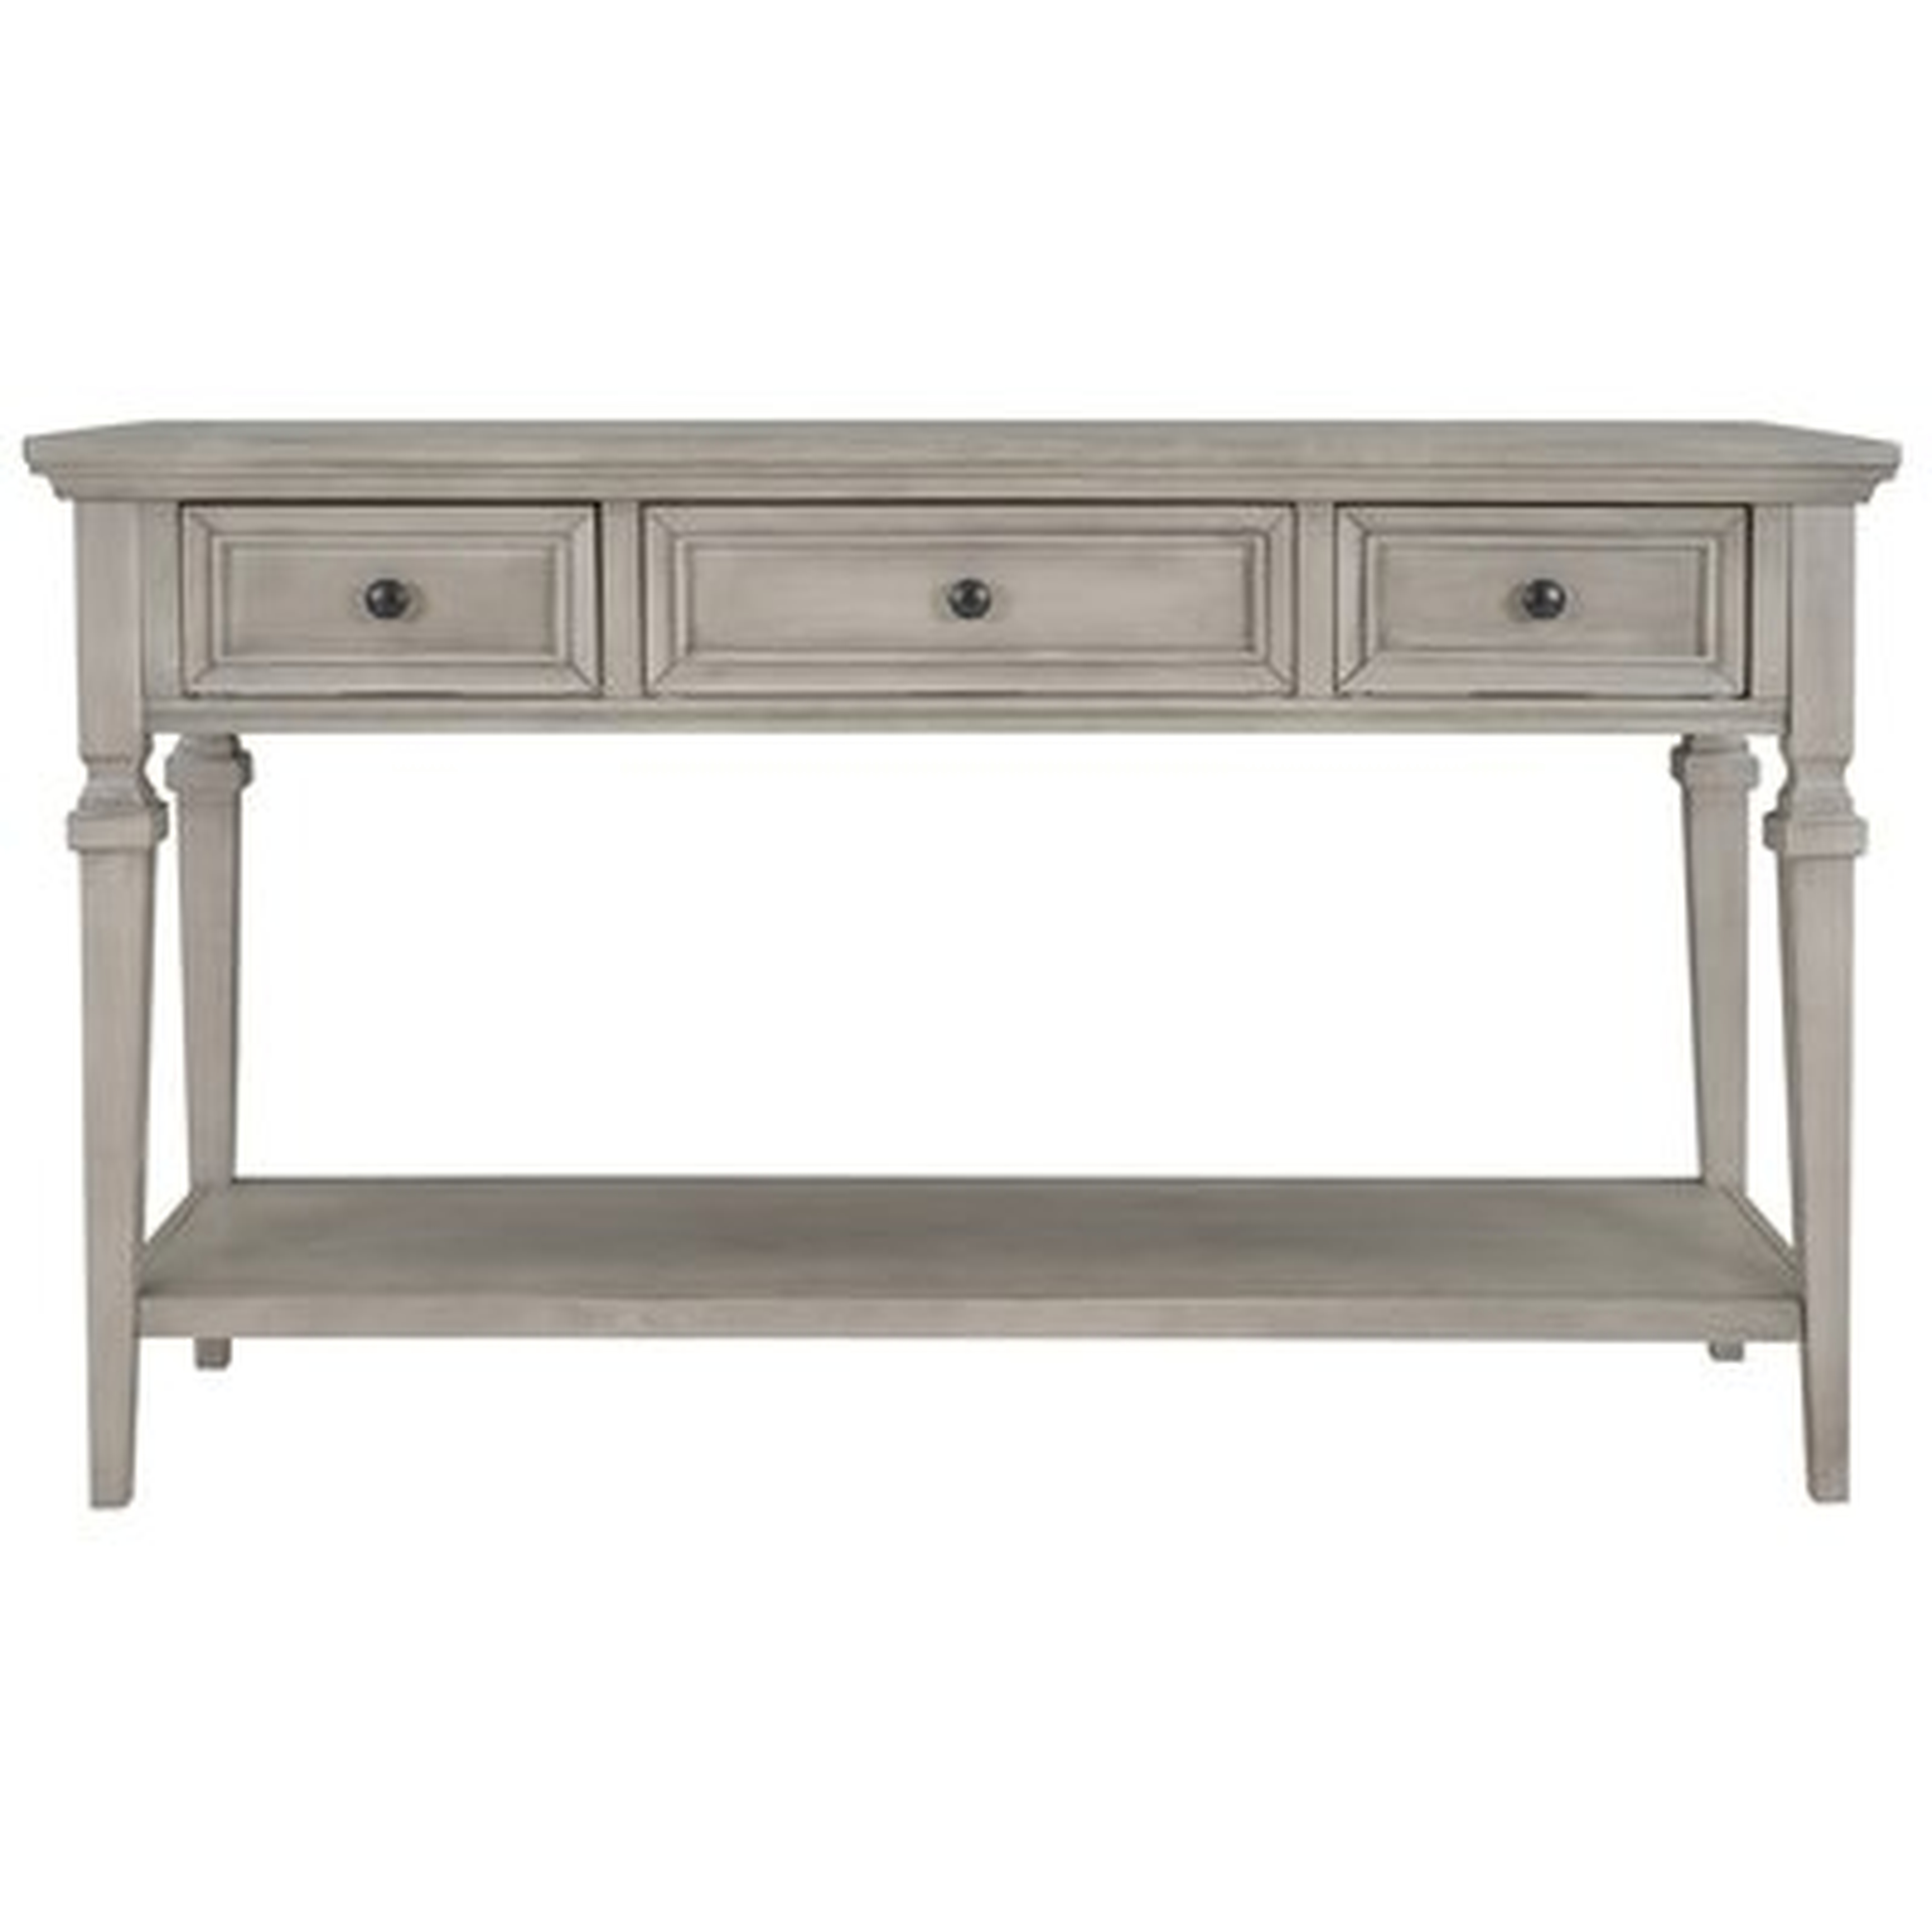 Classic Retro Style Console Table With Three Top Drawers And Open Style Bottom Shelf Pine Wooden Frame And Legs Easy Assembly Gray Wash - Wayfair